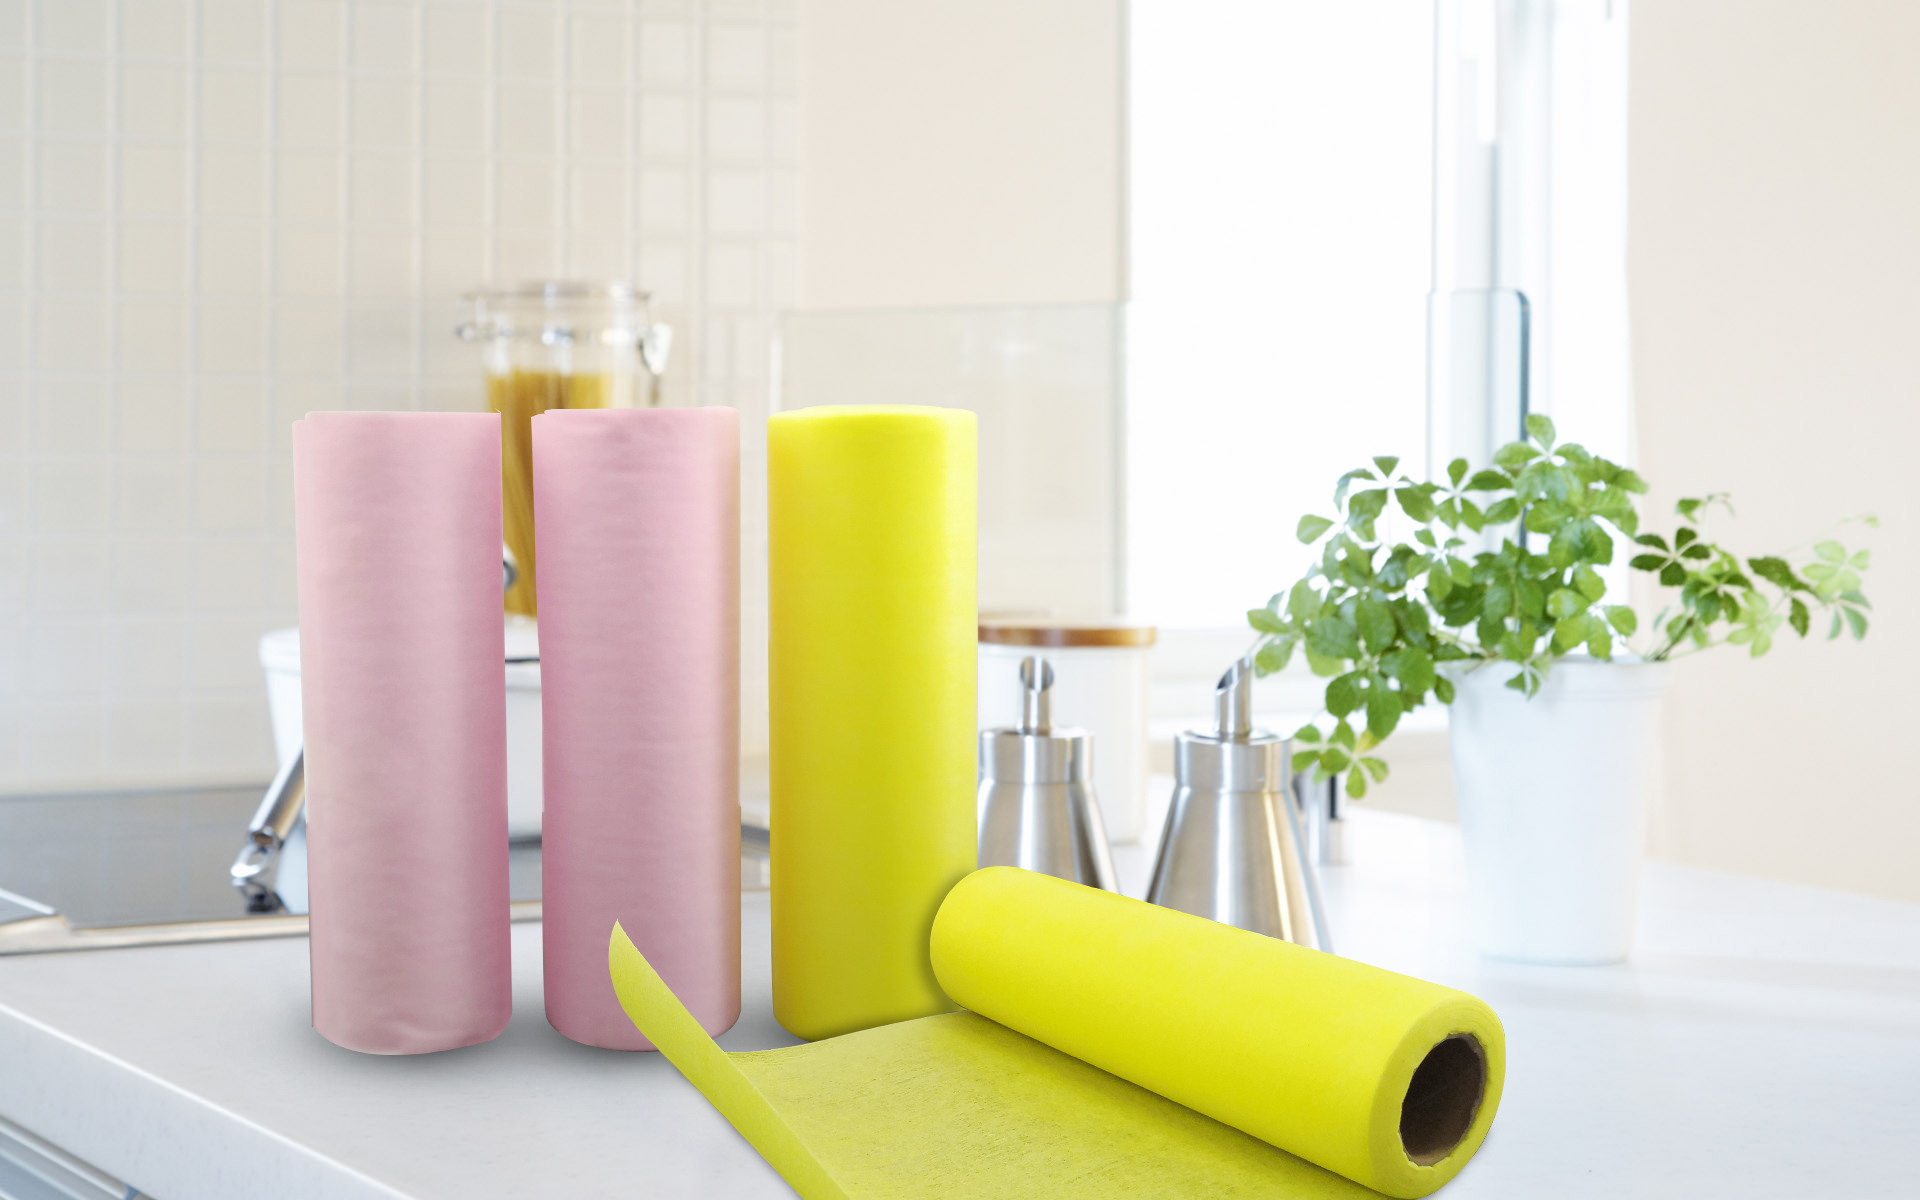 Yellow Disposable Anti Oil Non Woven Kitchen Cleaning Cloth